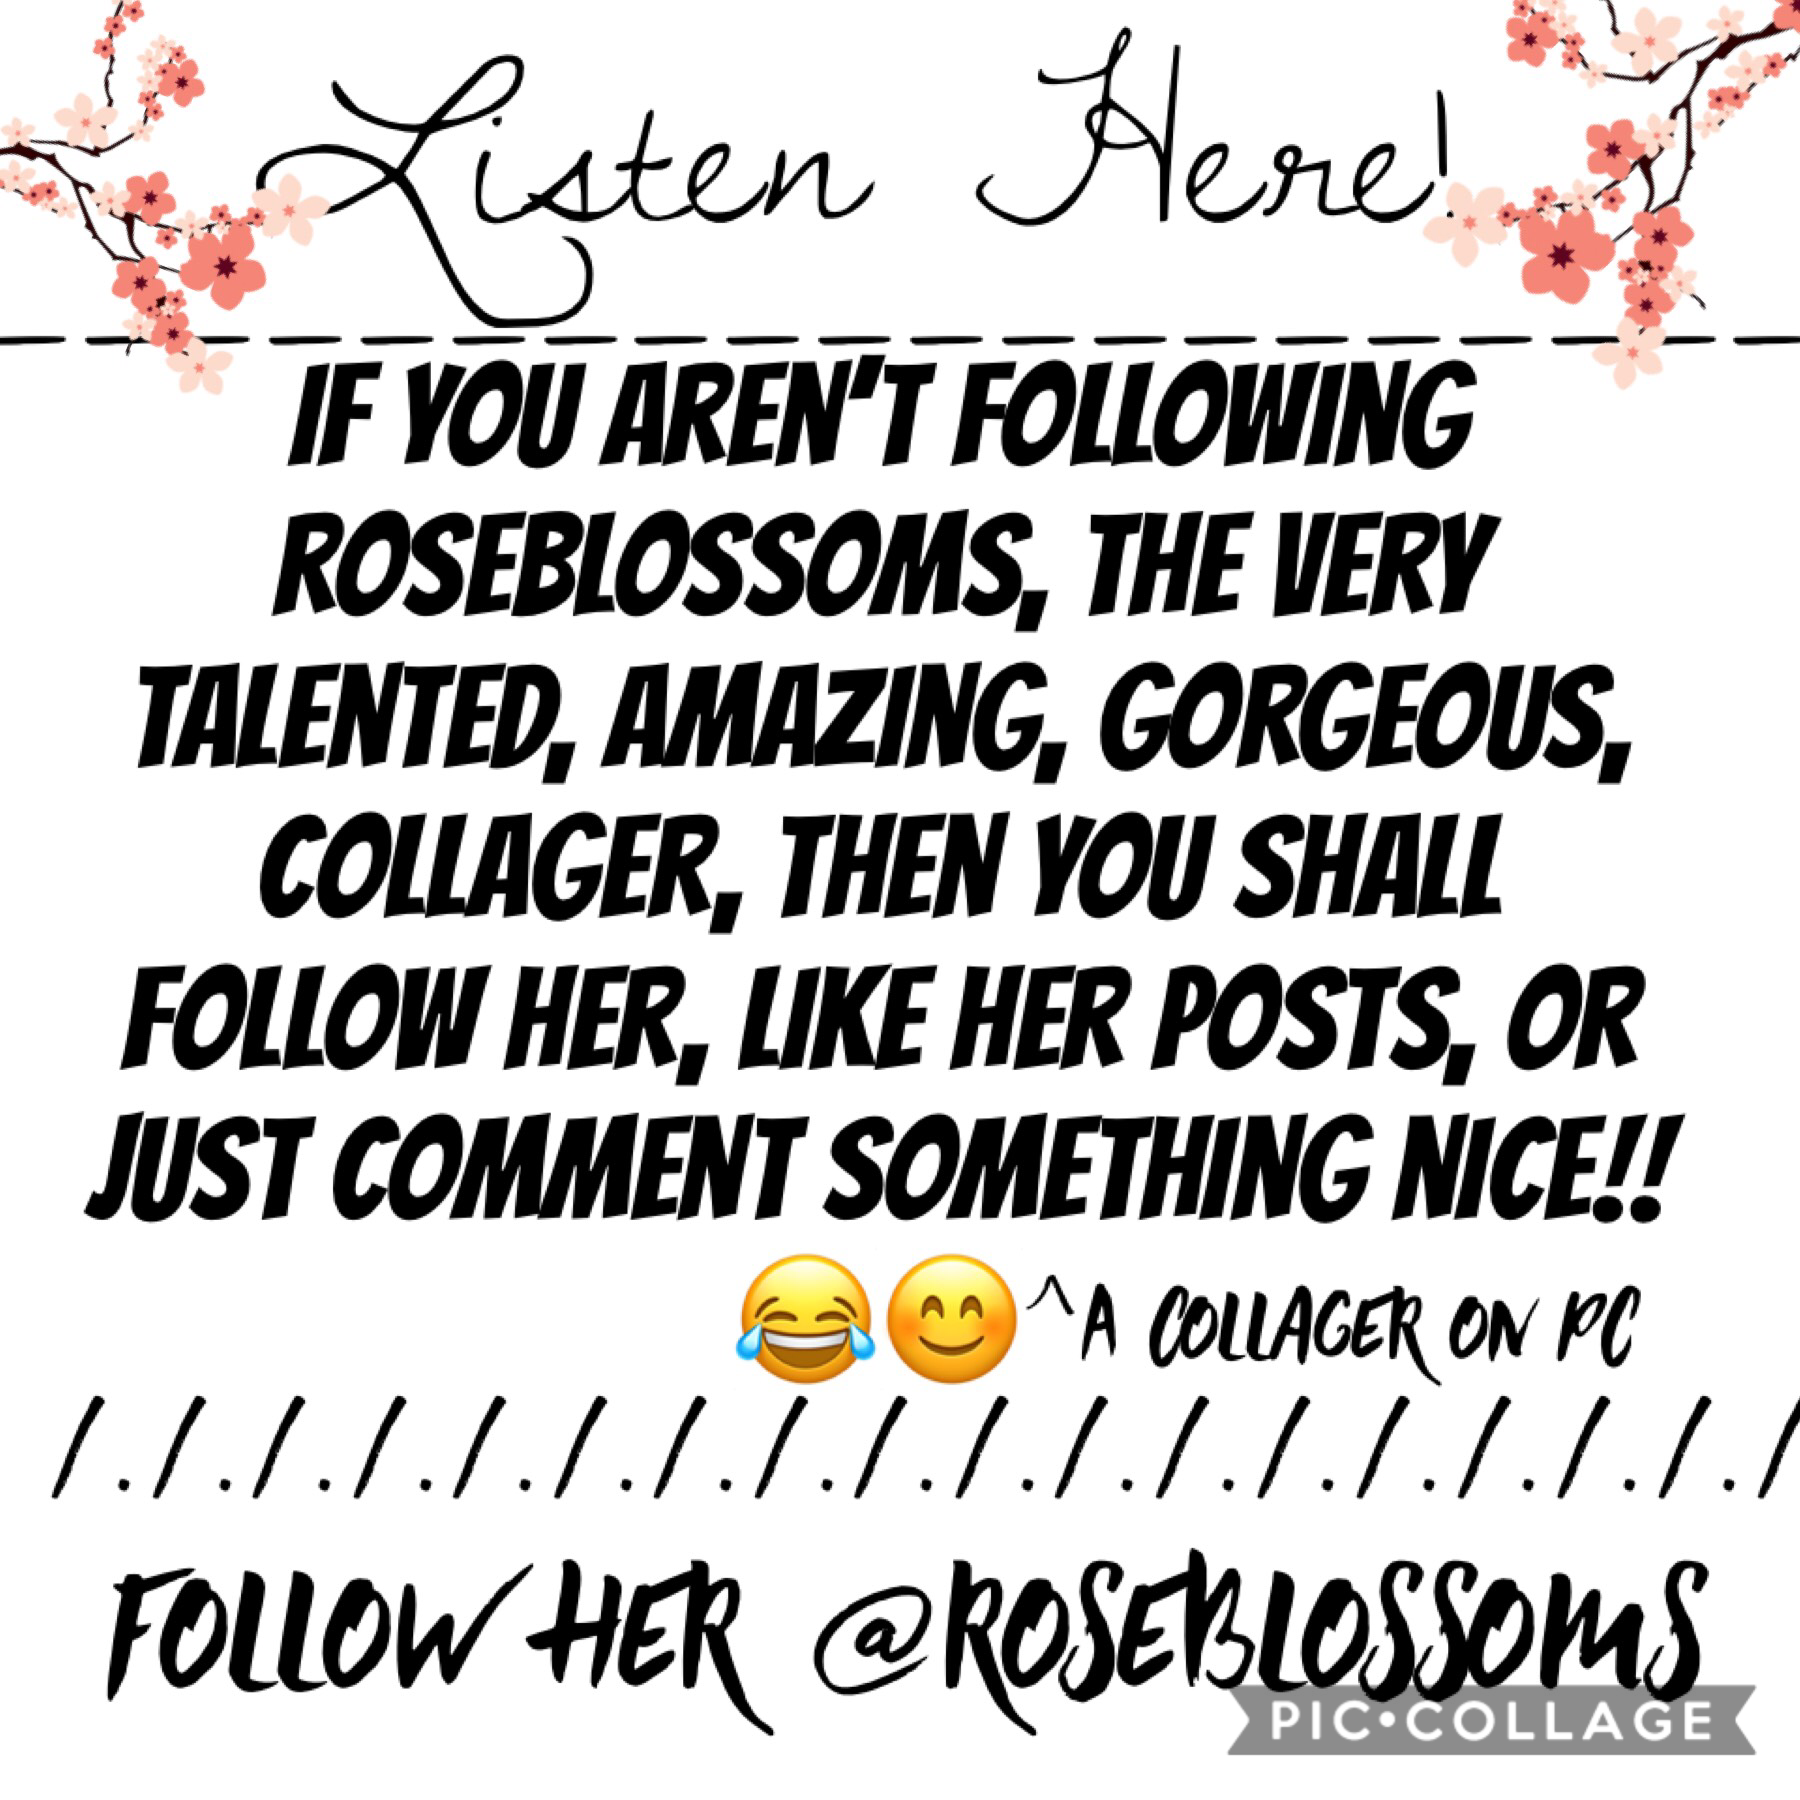 Listen Here.. (your supposed to tap)

FOLLOW @roseblossoms💐

LIKE DEM POSTS!!❤️

COMMENT SOMETHING NICE!!😊

👋✌️👋